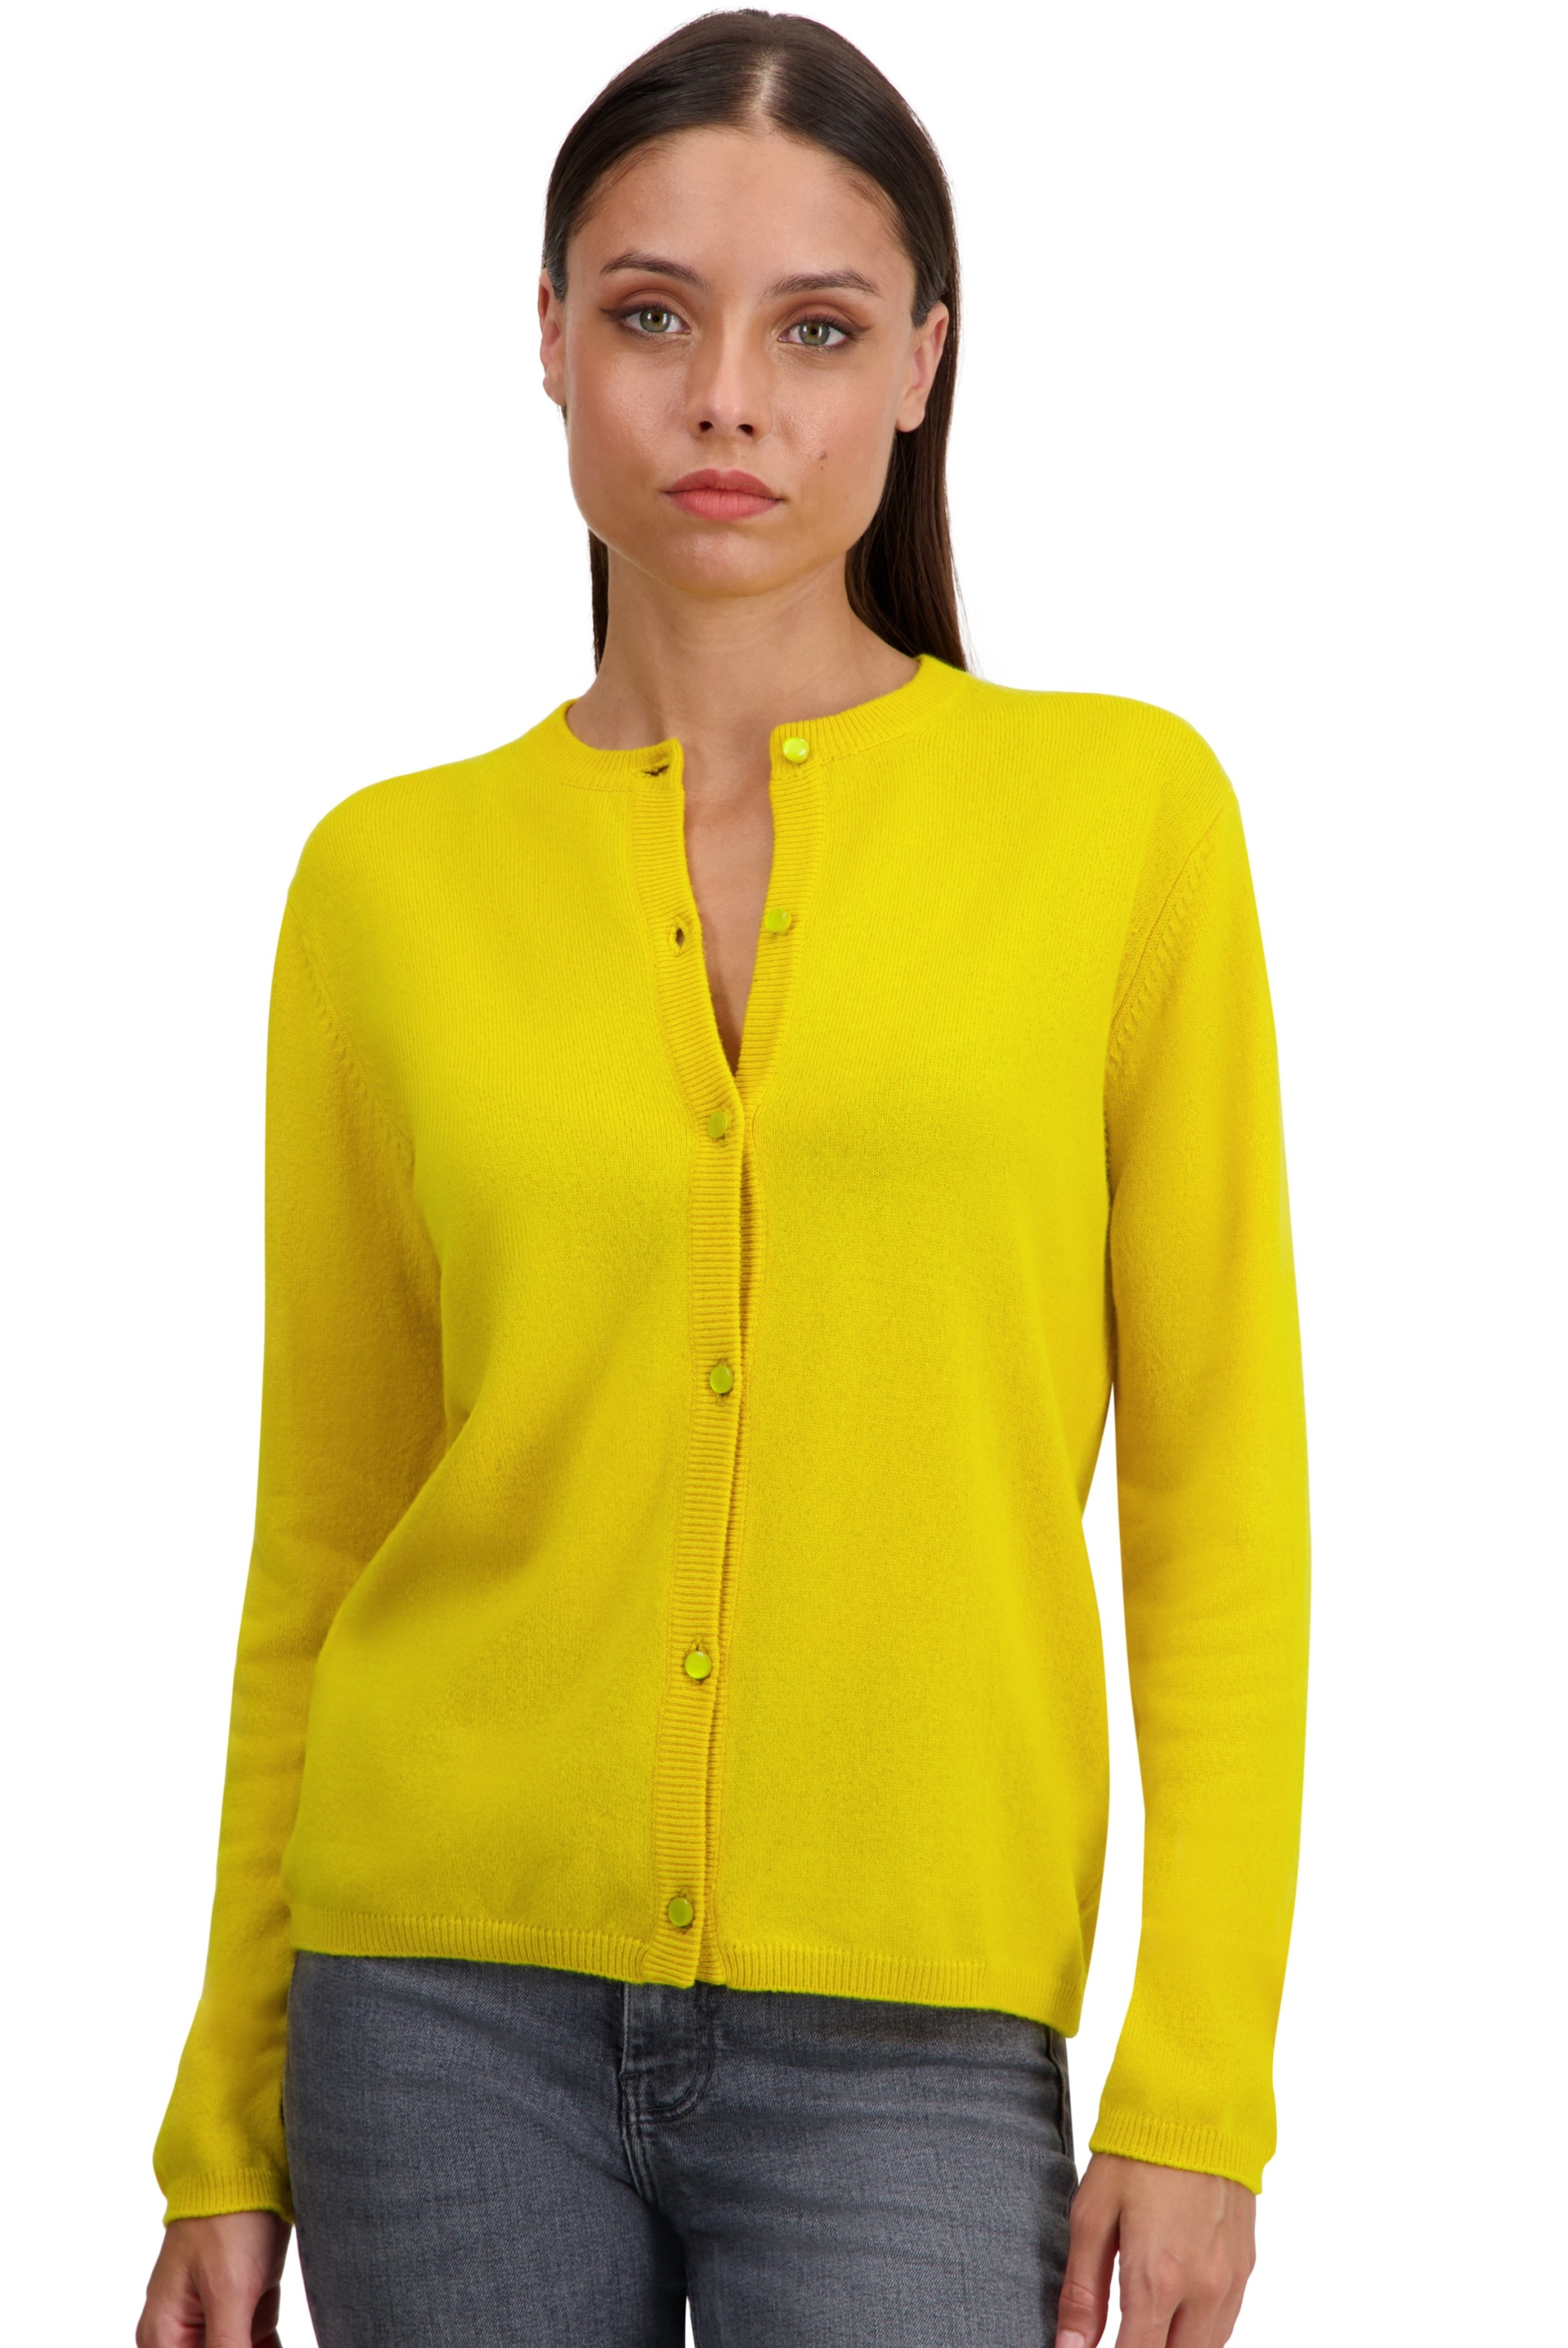 Cashmere ladies cardigans chloe cyber yellow s